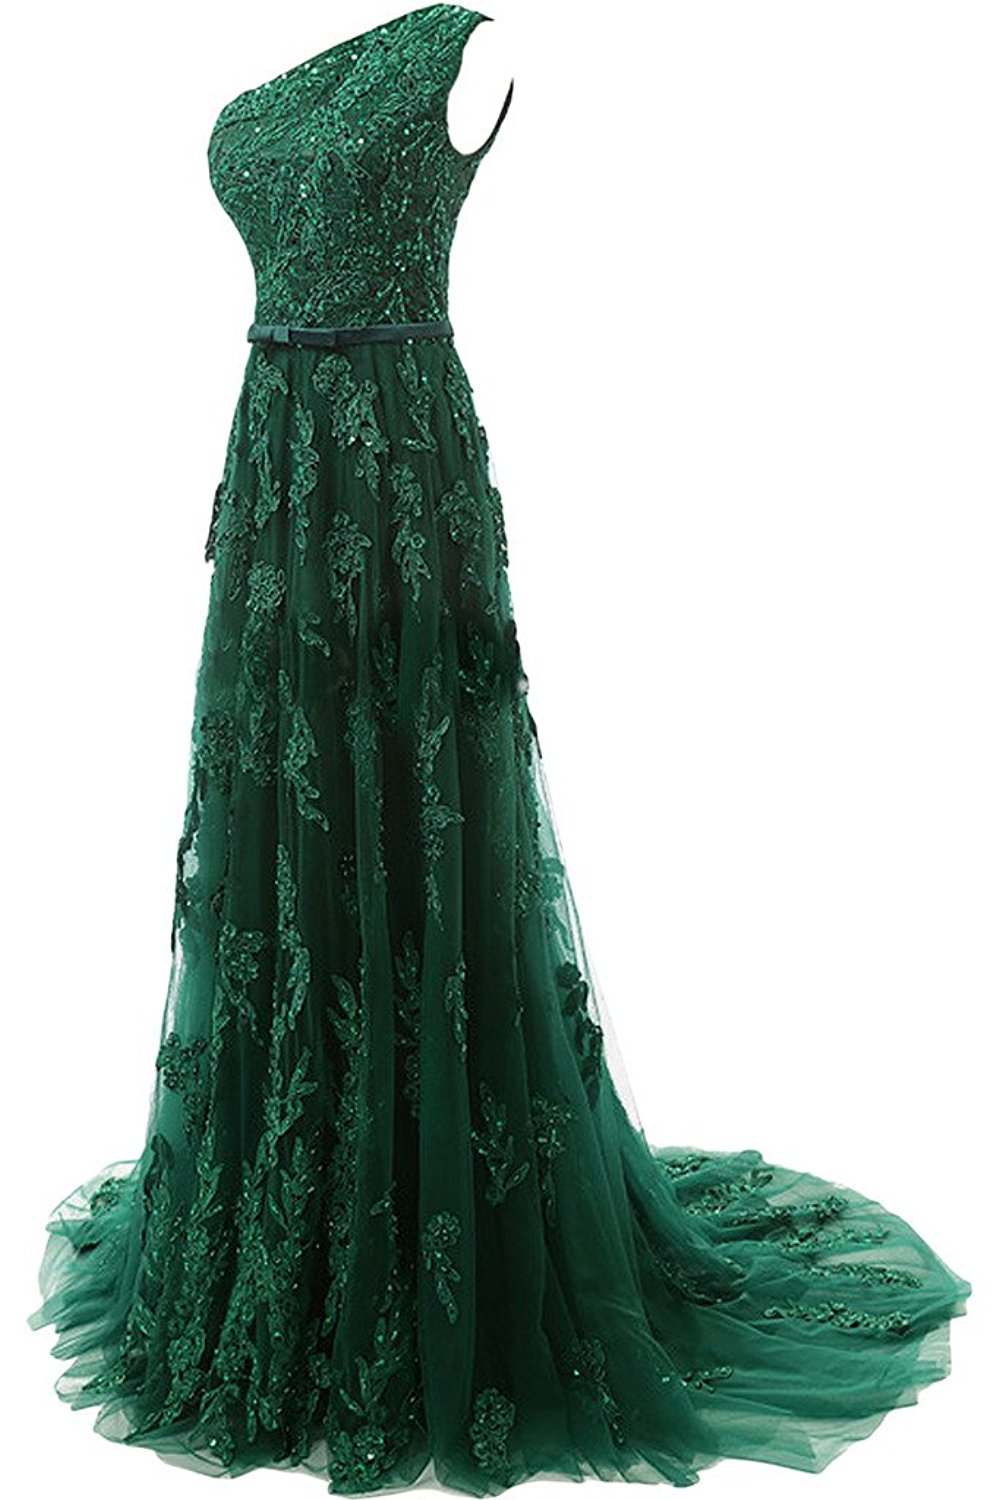 Forest Green Lace Appliques Tulle Floor Length Prom Dress, Featuring One Shoulder Bodice With Bow Accent Belt